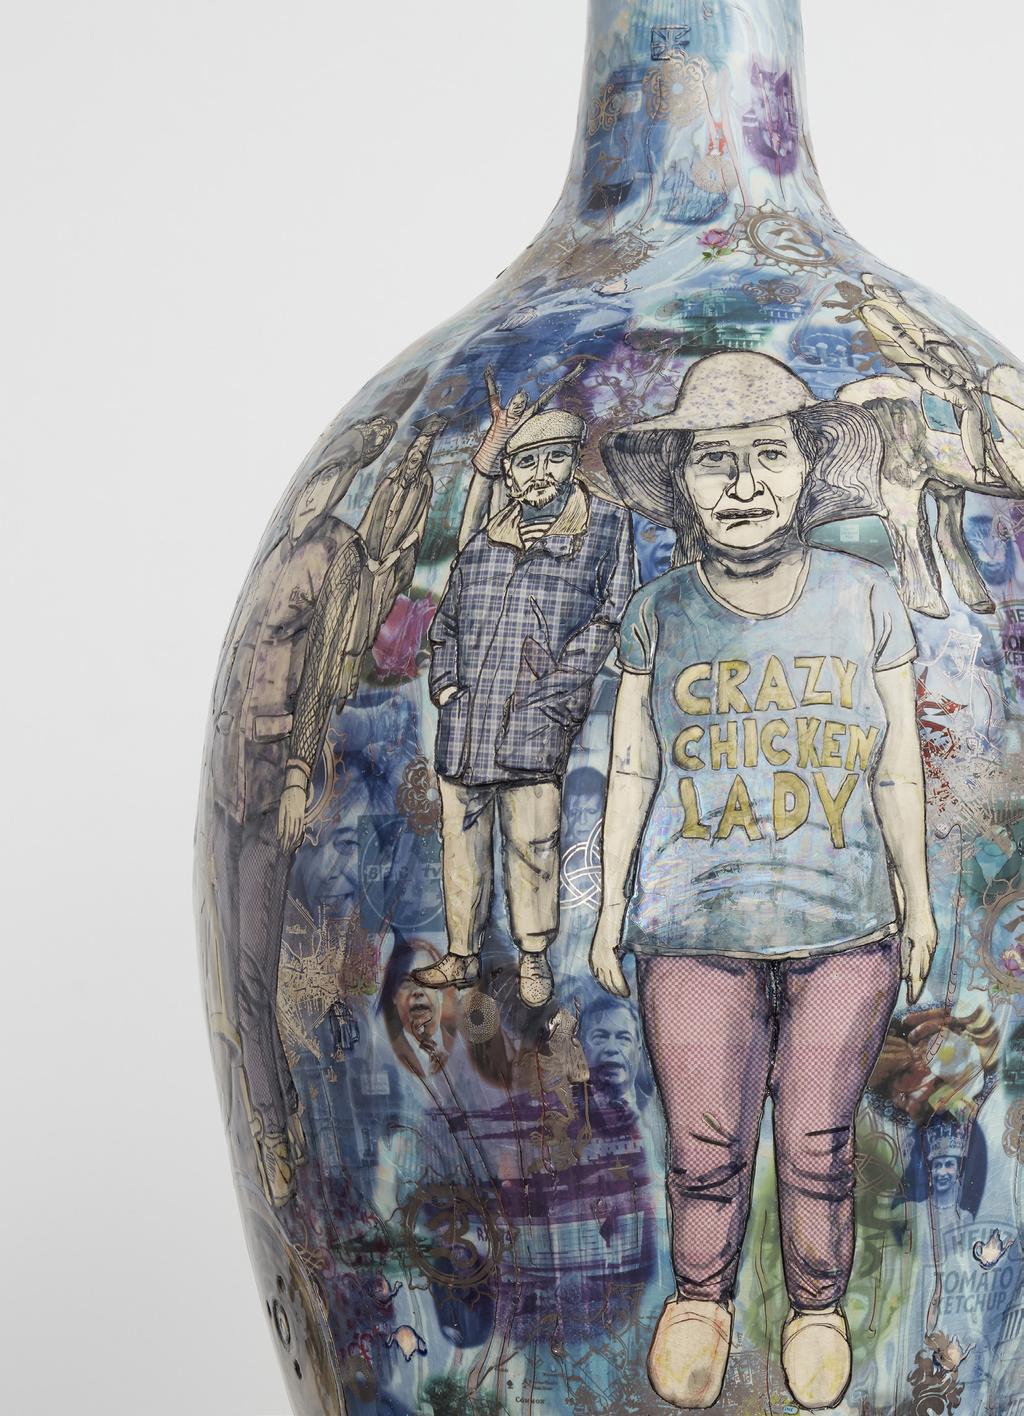 Key Work: Matching Pair Grayson Perry s Matching Pair have so much in common, but are so far apart.